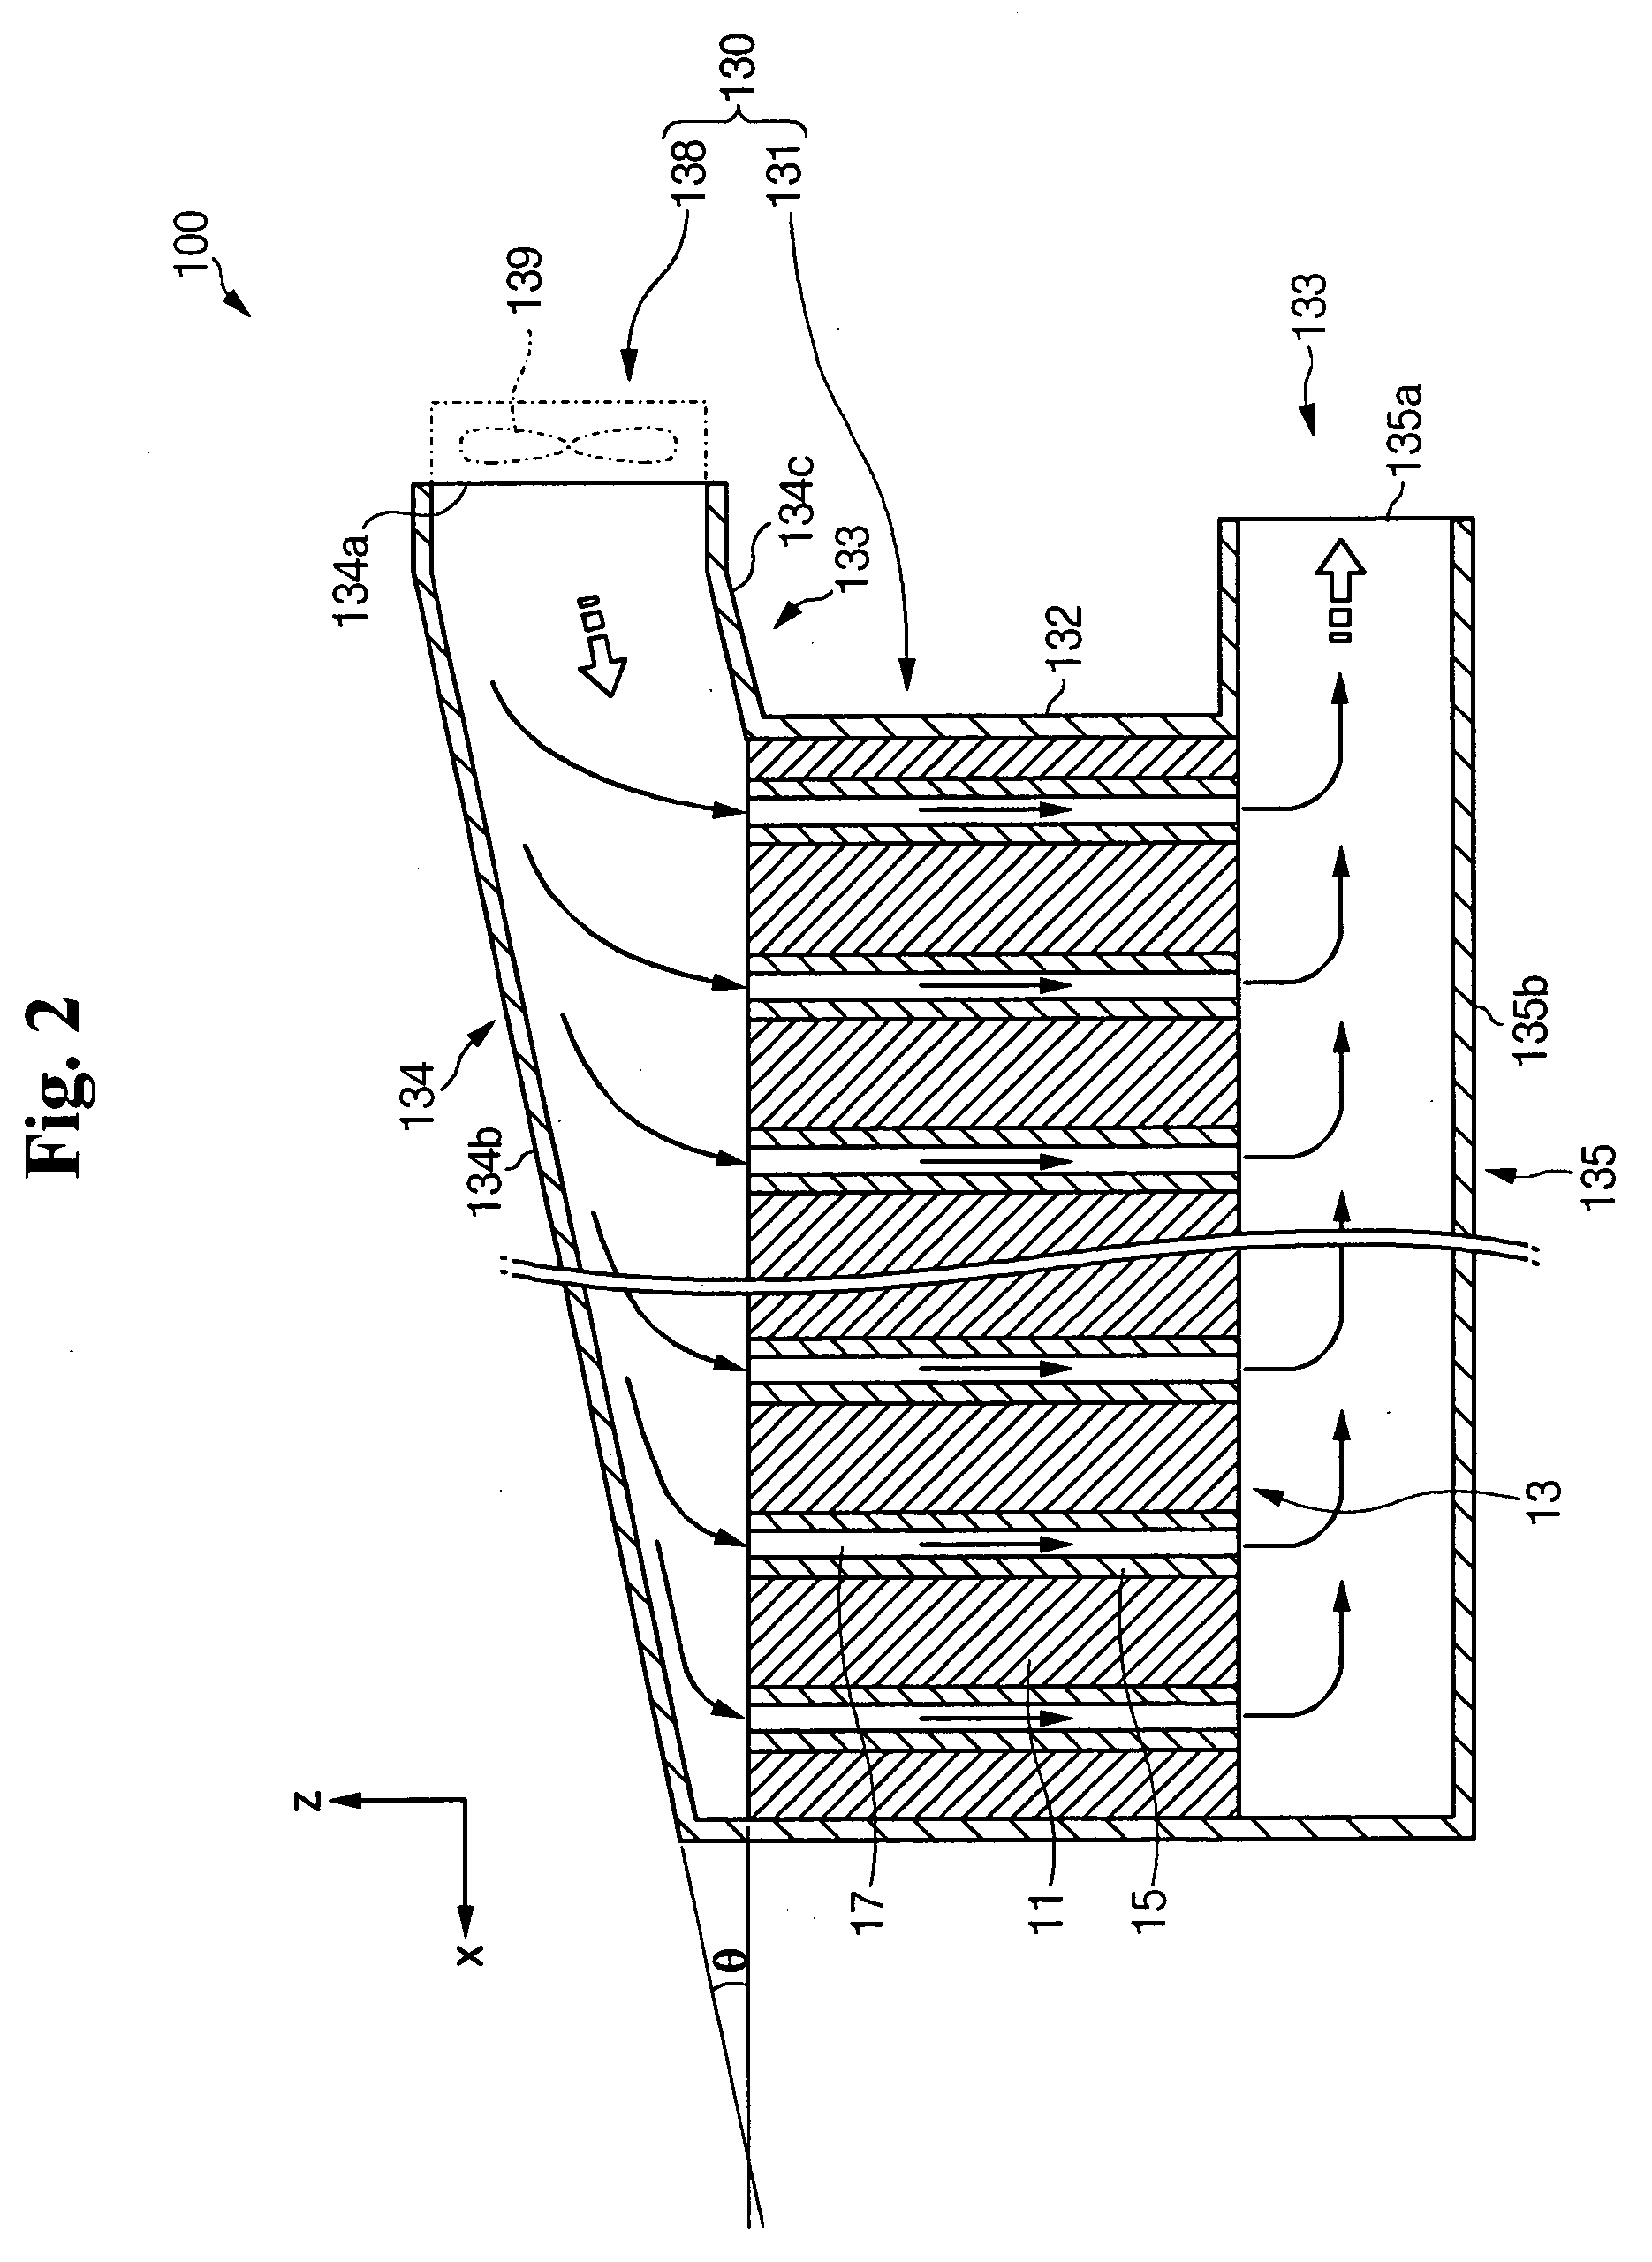 Secondary battery module and cooling apparatus for secondary battery module